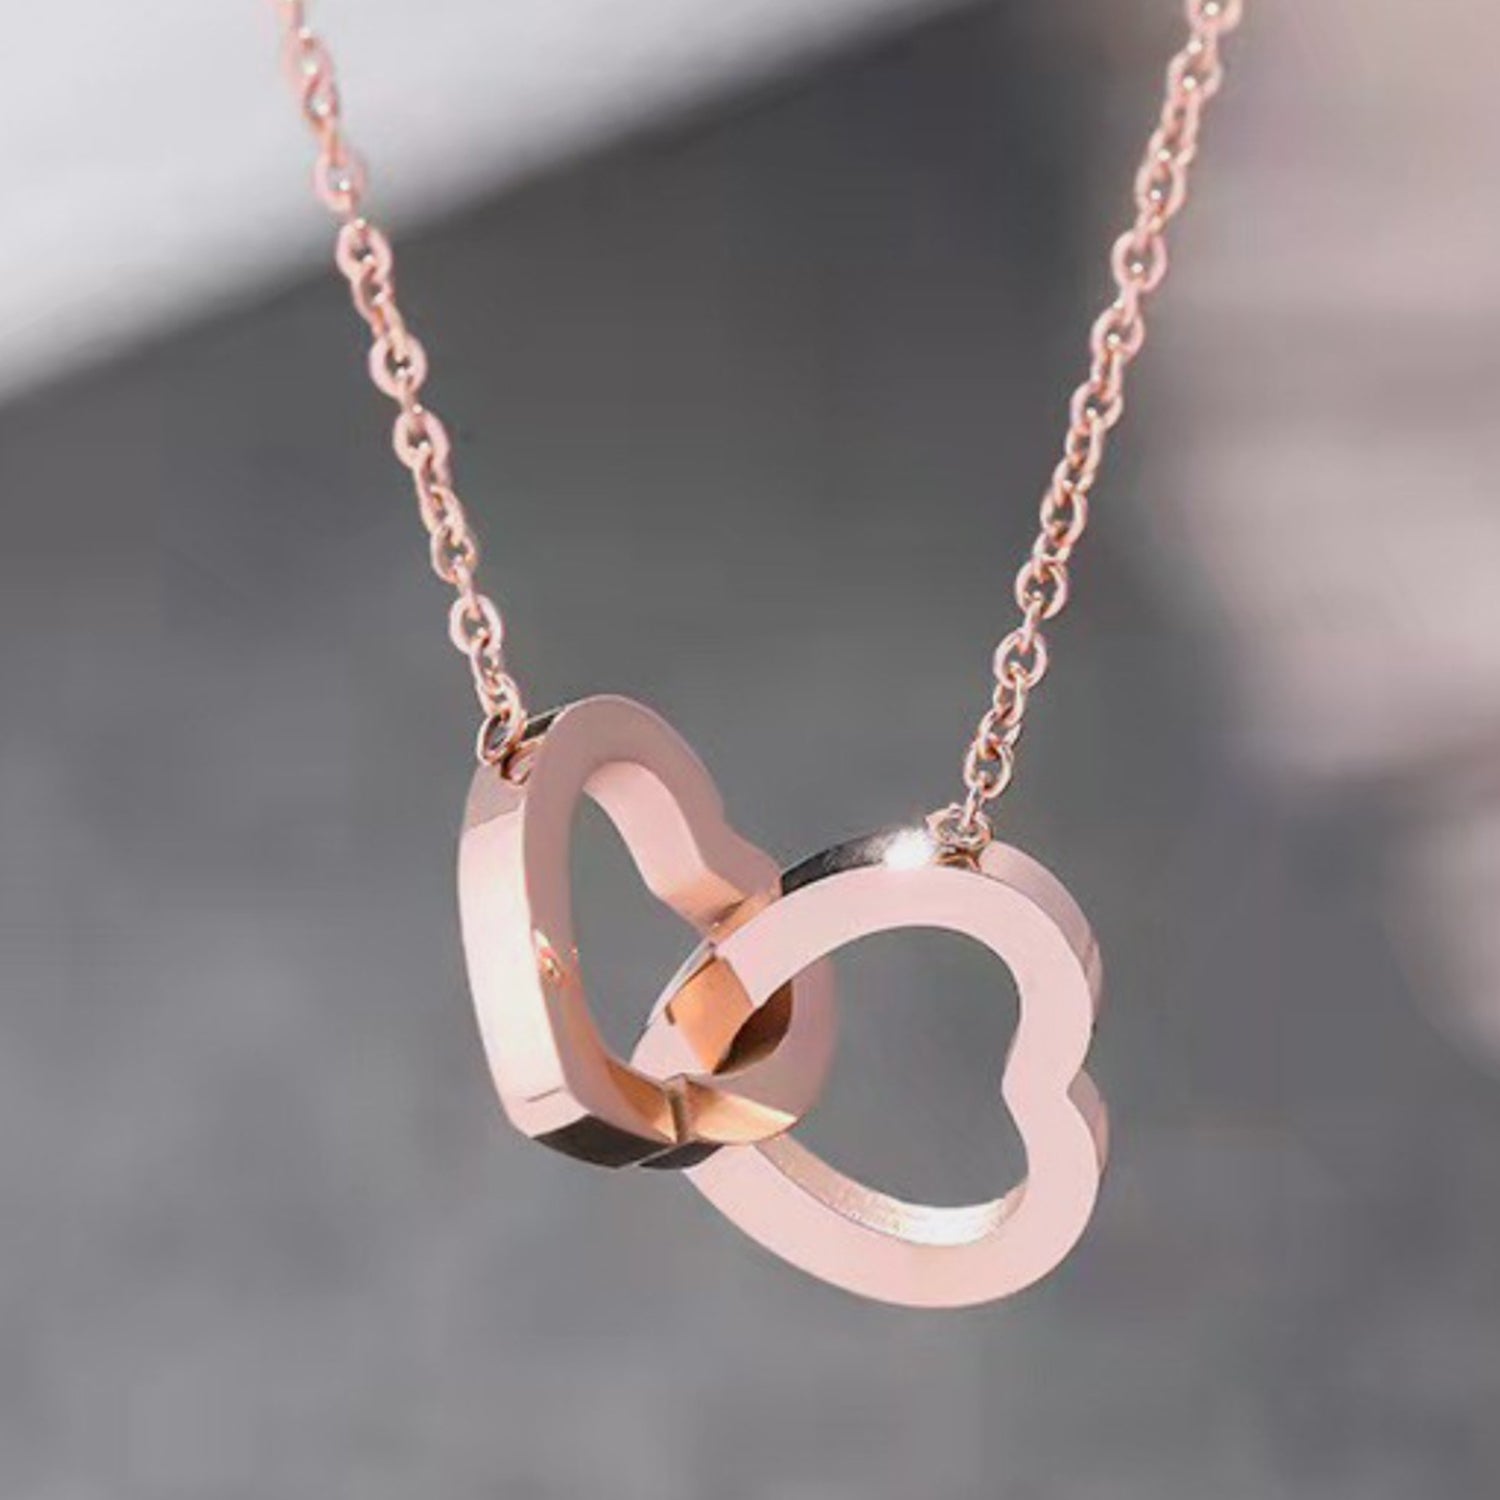 Alloy Double Heart Necklace - Admiresty